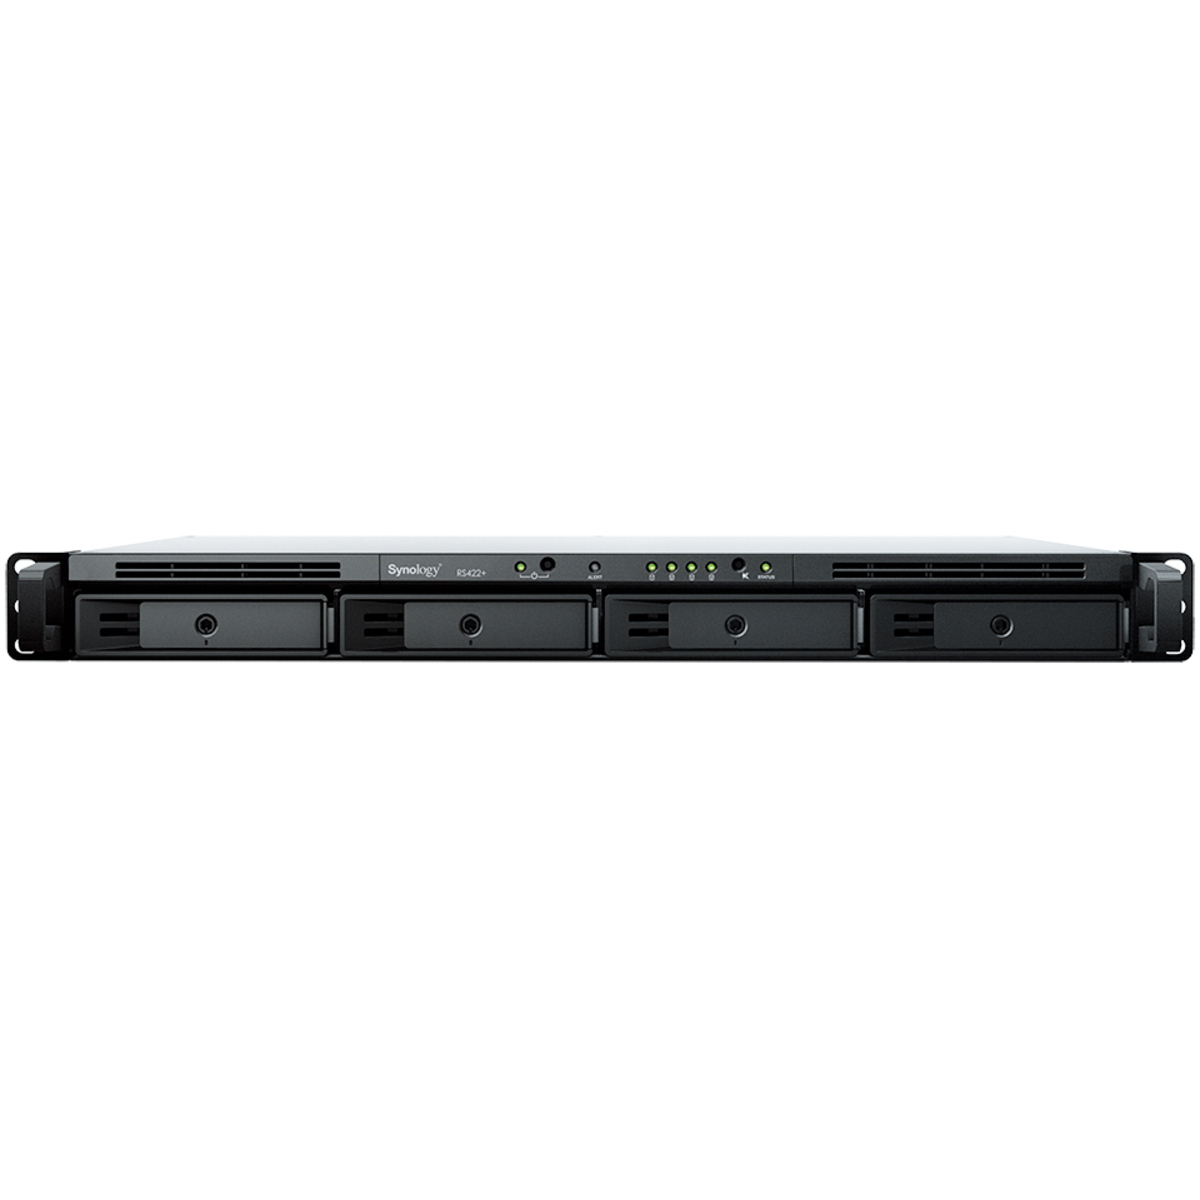 Synology RackStation RS422+ 88tb 4-Bay RackMount Personal / Basic Home / Small Office NAS - Network Attached Storage Device 4x22tb Seagate EXOS X22 ST22000NM001E 3.5 7200rpm SATA 6Gb/s HDD ENTERPRISE Class Drives Installed - Burn-In Tested RackStation RS422+